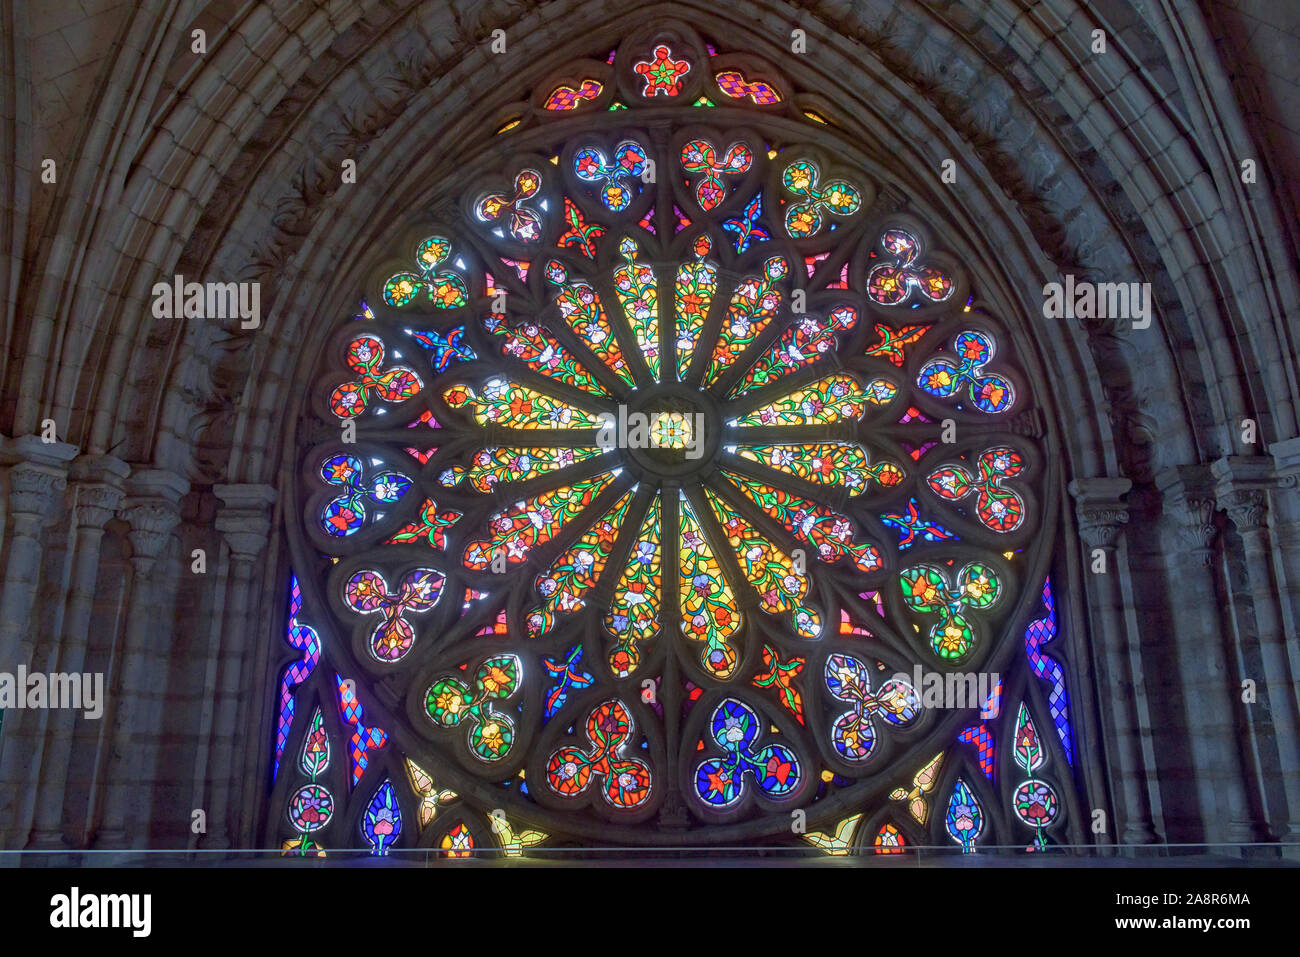 Rose window stained glass in the Basilica of the National Vow (Basílica del Voto Nacional), Quito, Ecuador Stock Photo